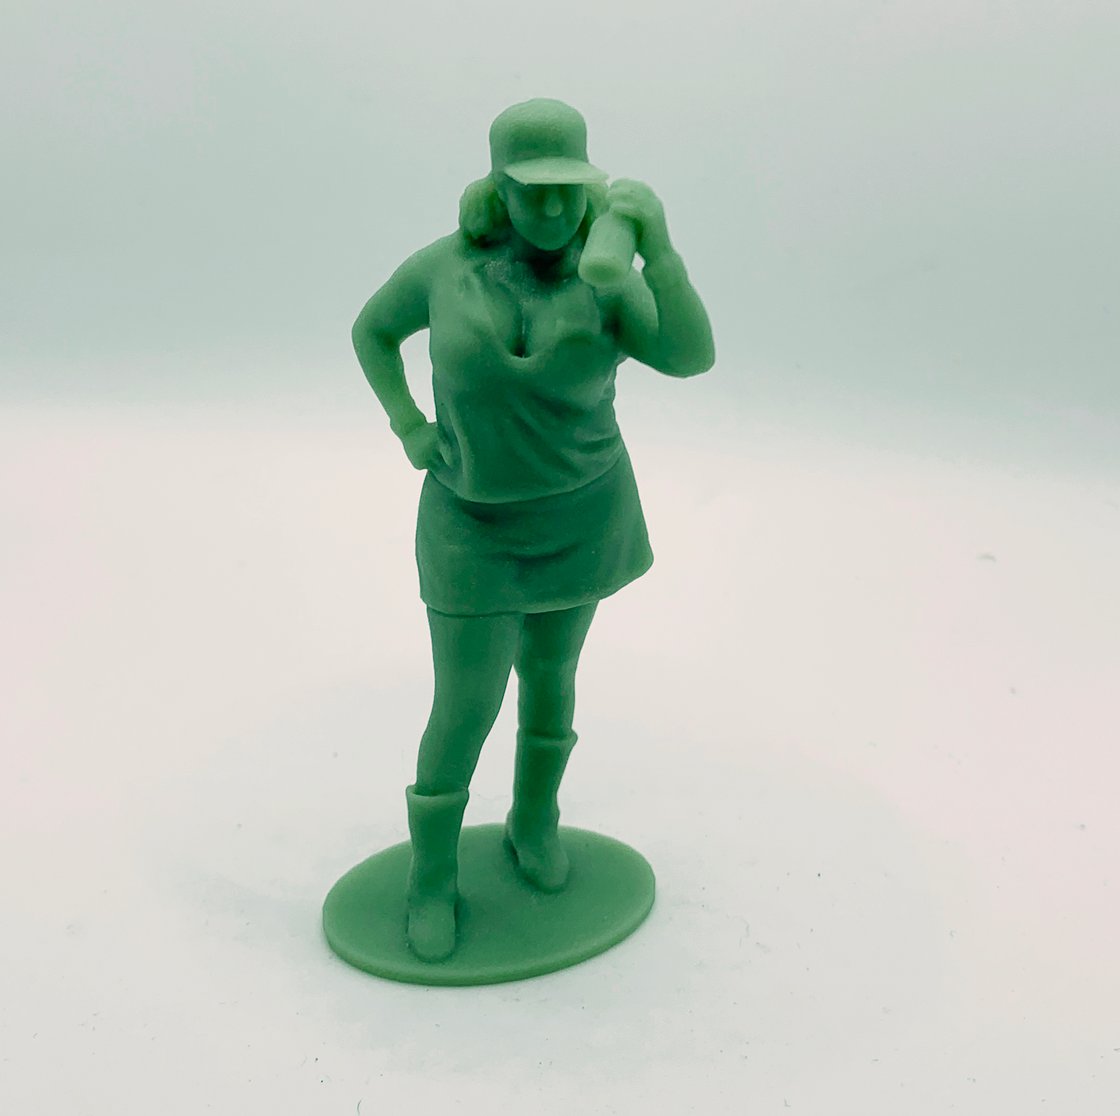 Image of One person 3D scan session & 3.25" figure